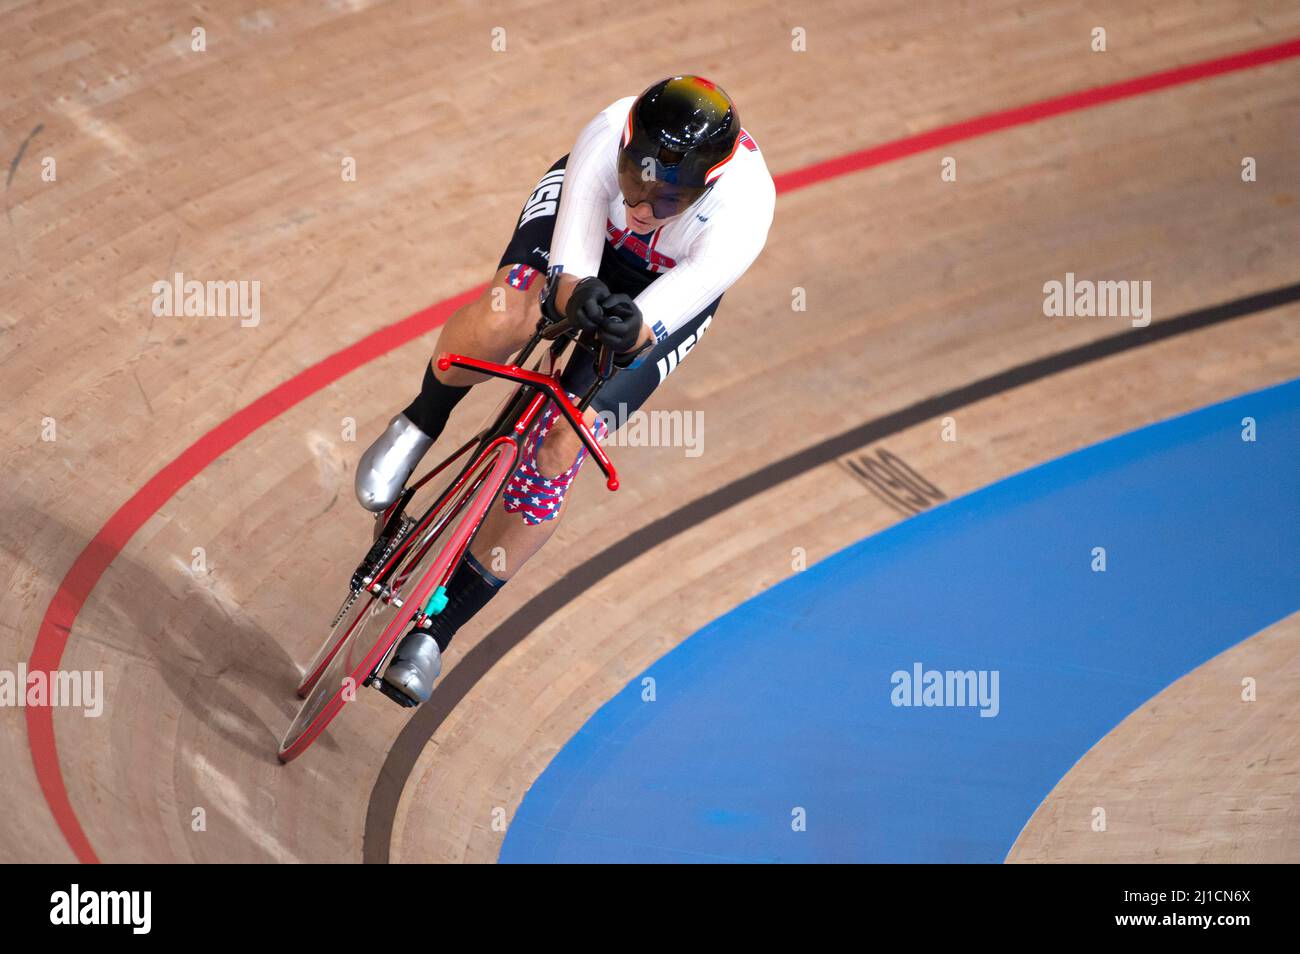 Shawn Morelli of the United States, winning the silver medal in the women's individual pursuit at the Tokyo 2020 Paralympic Games Stock Photo